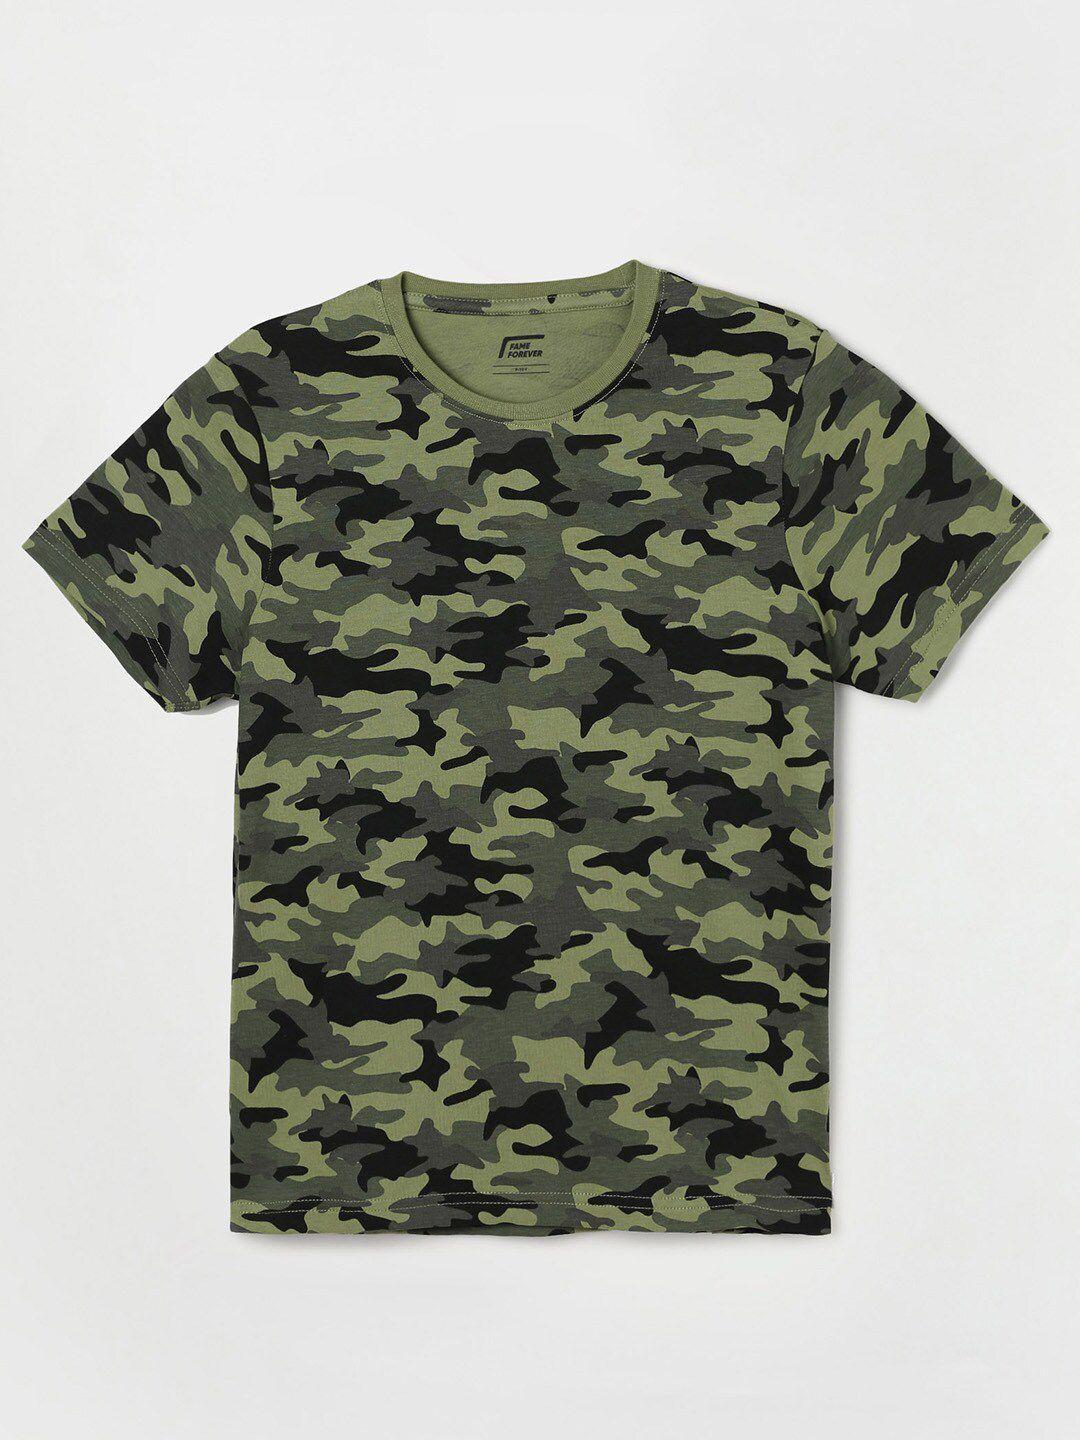 fame-forever-by-lifestyle-boys-green-camouflage-printed-cotton-t-shirt